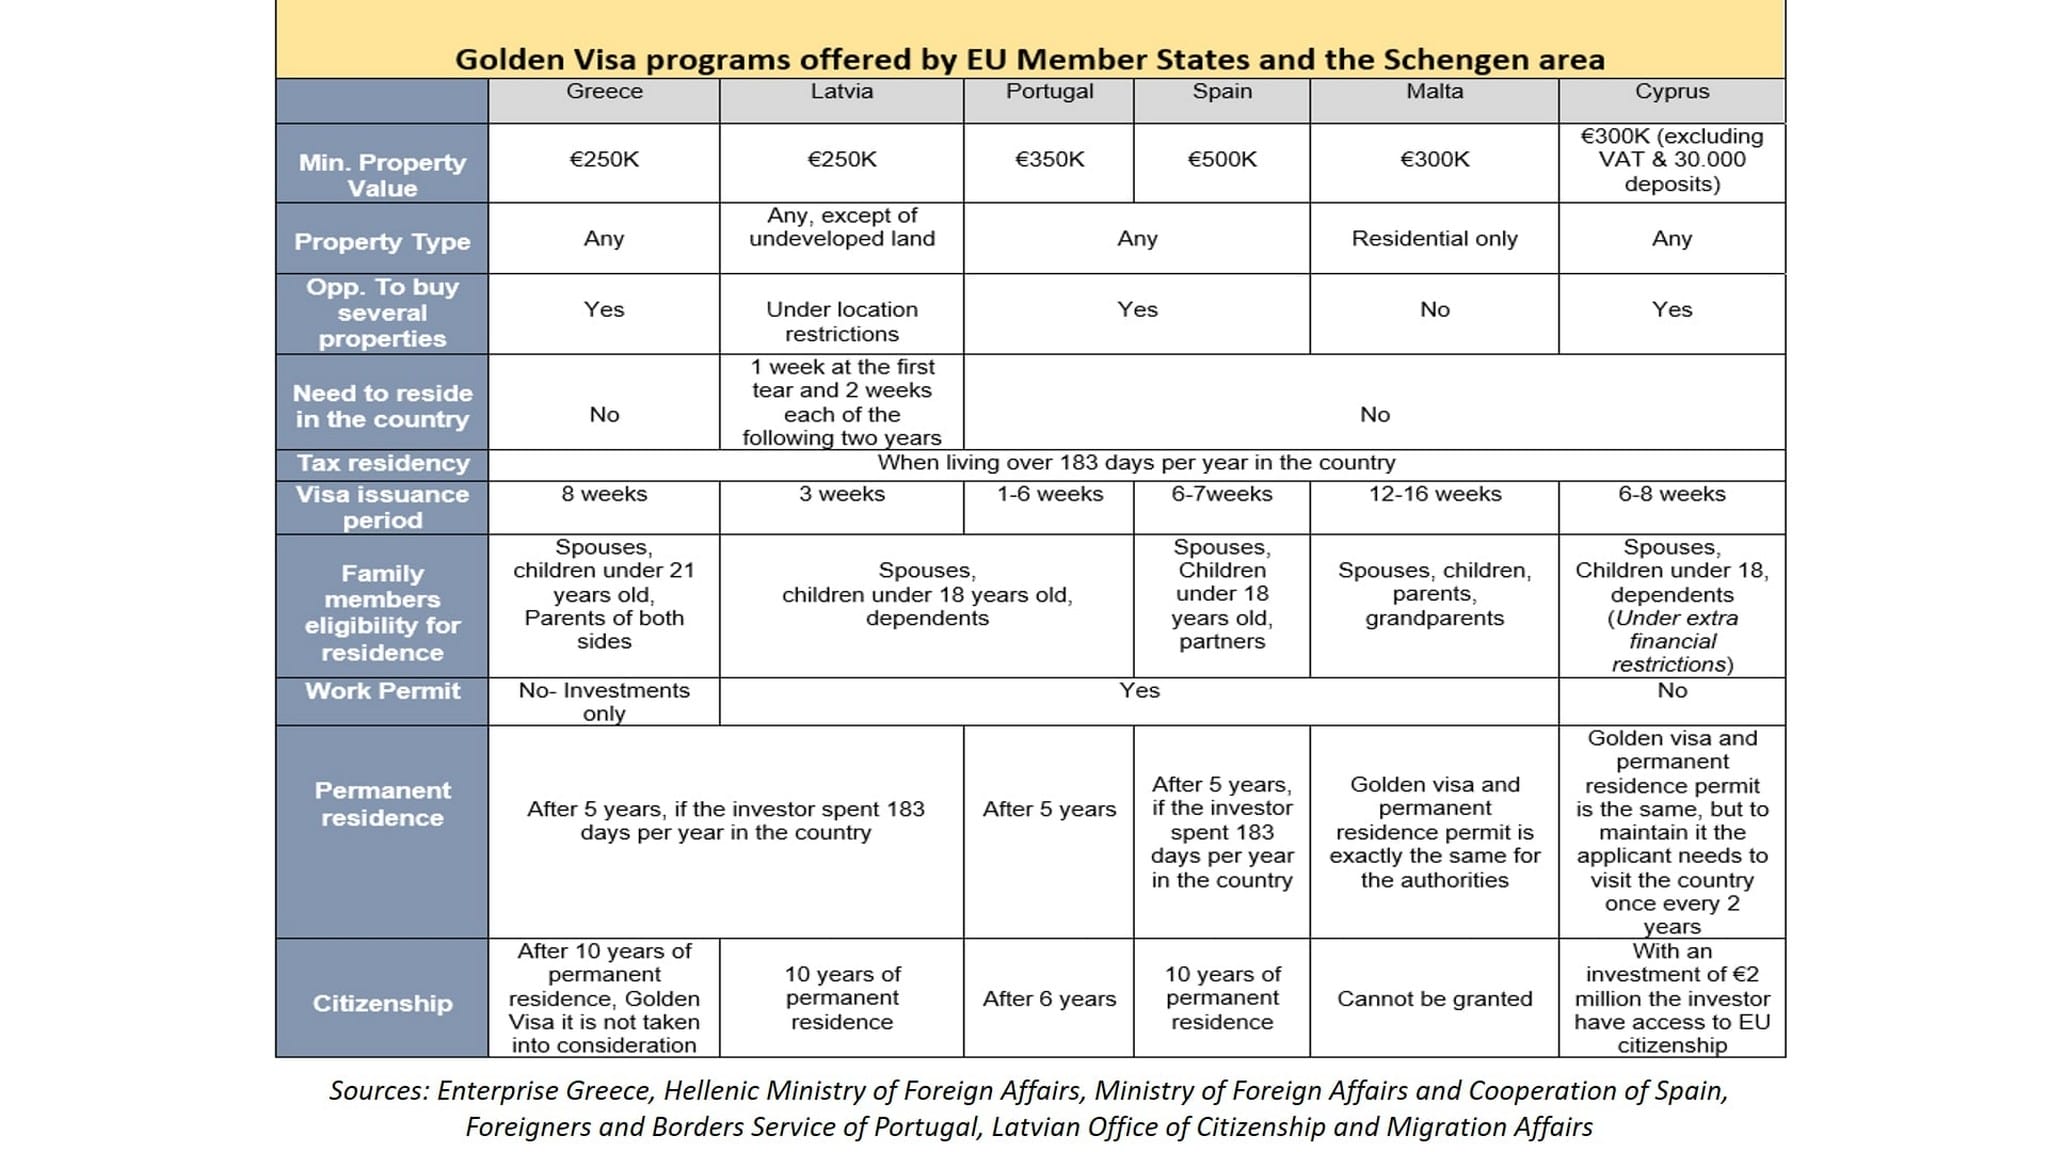 Comparative table of Golden Visa Programs by Divine Property